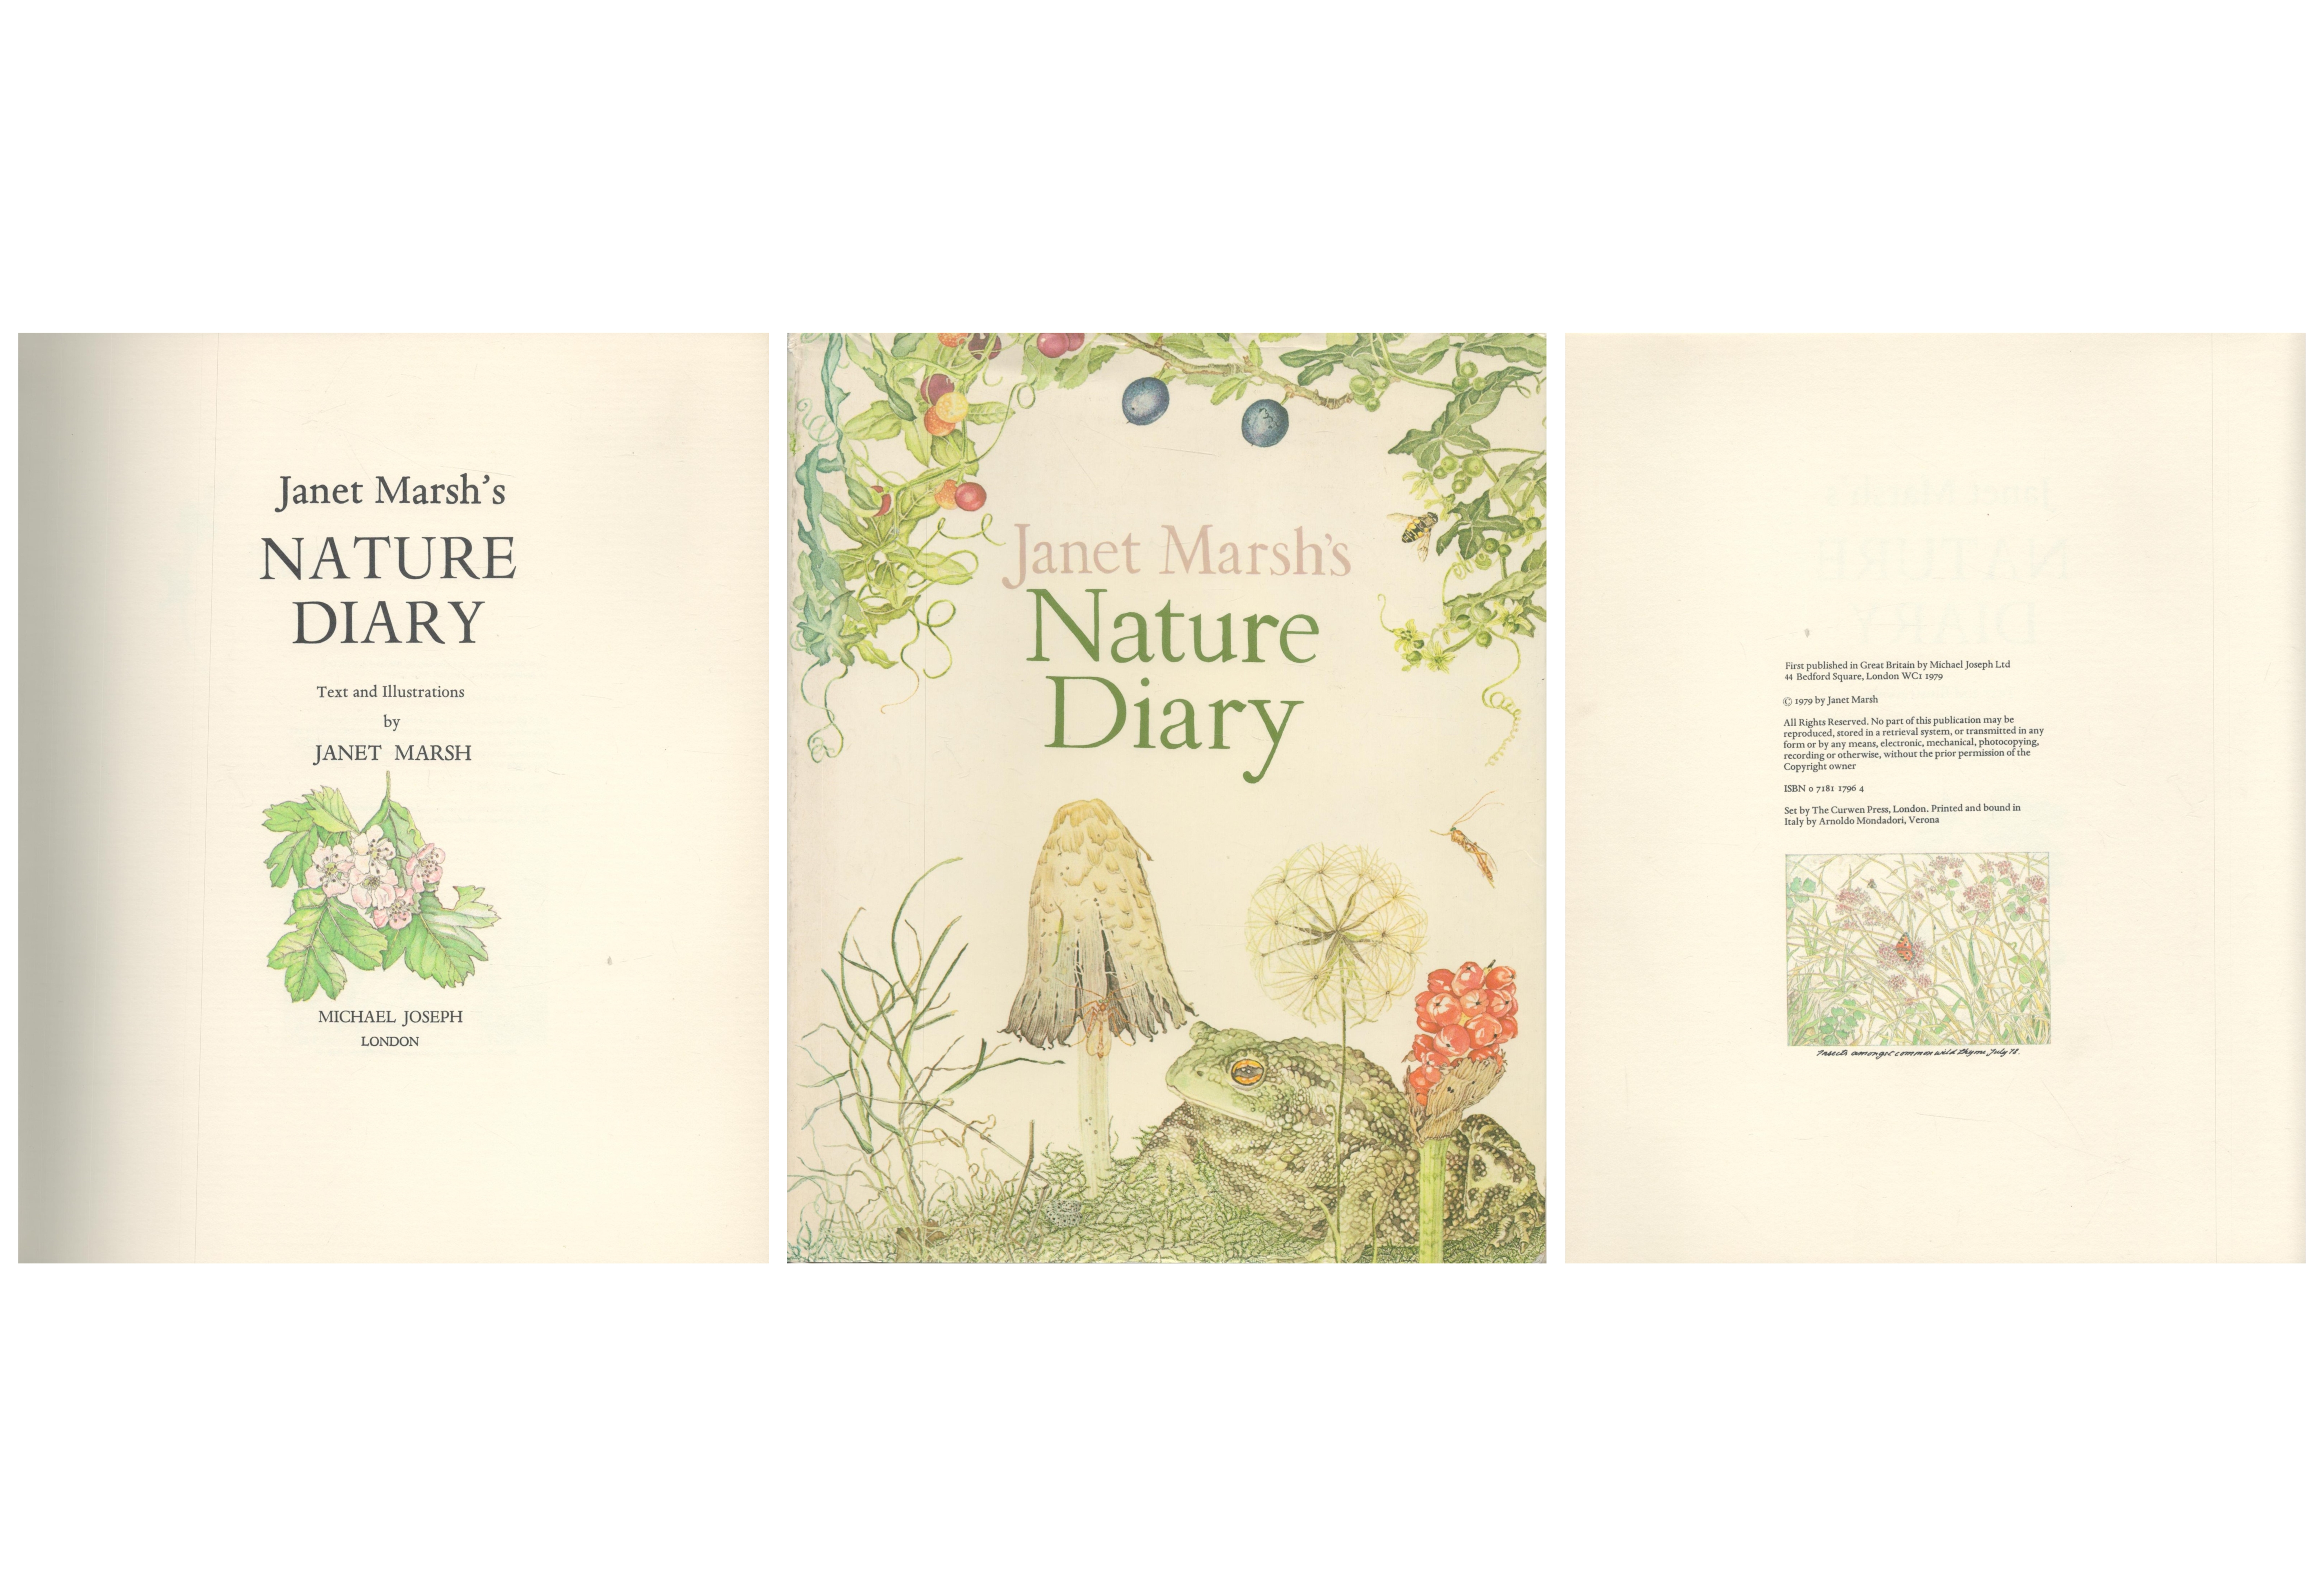 Nature Diary by Janet Marsh 1979 Hardback Book First Edition published by Michael Joseph. Est.